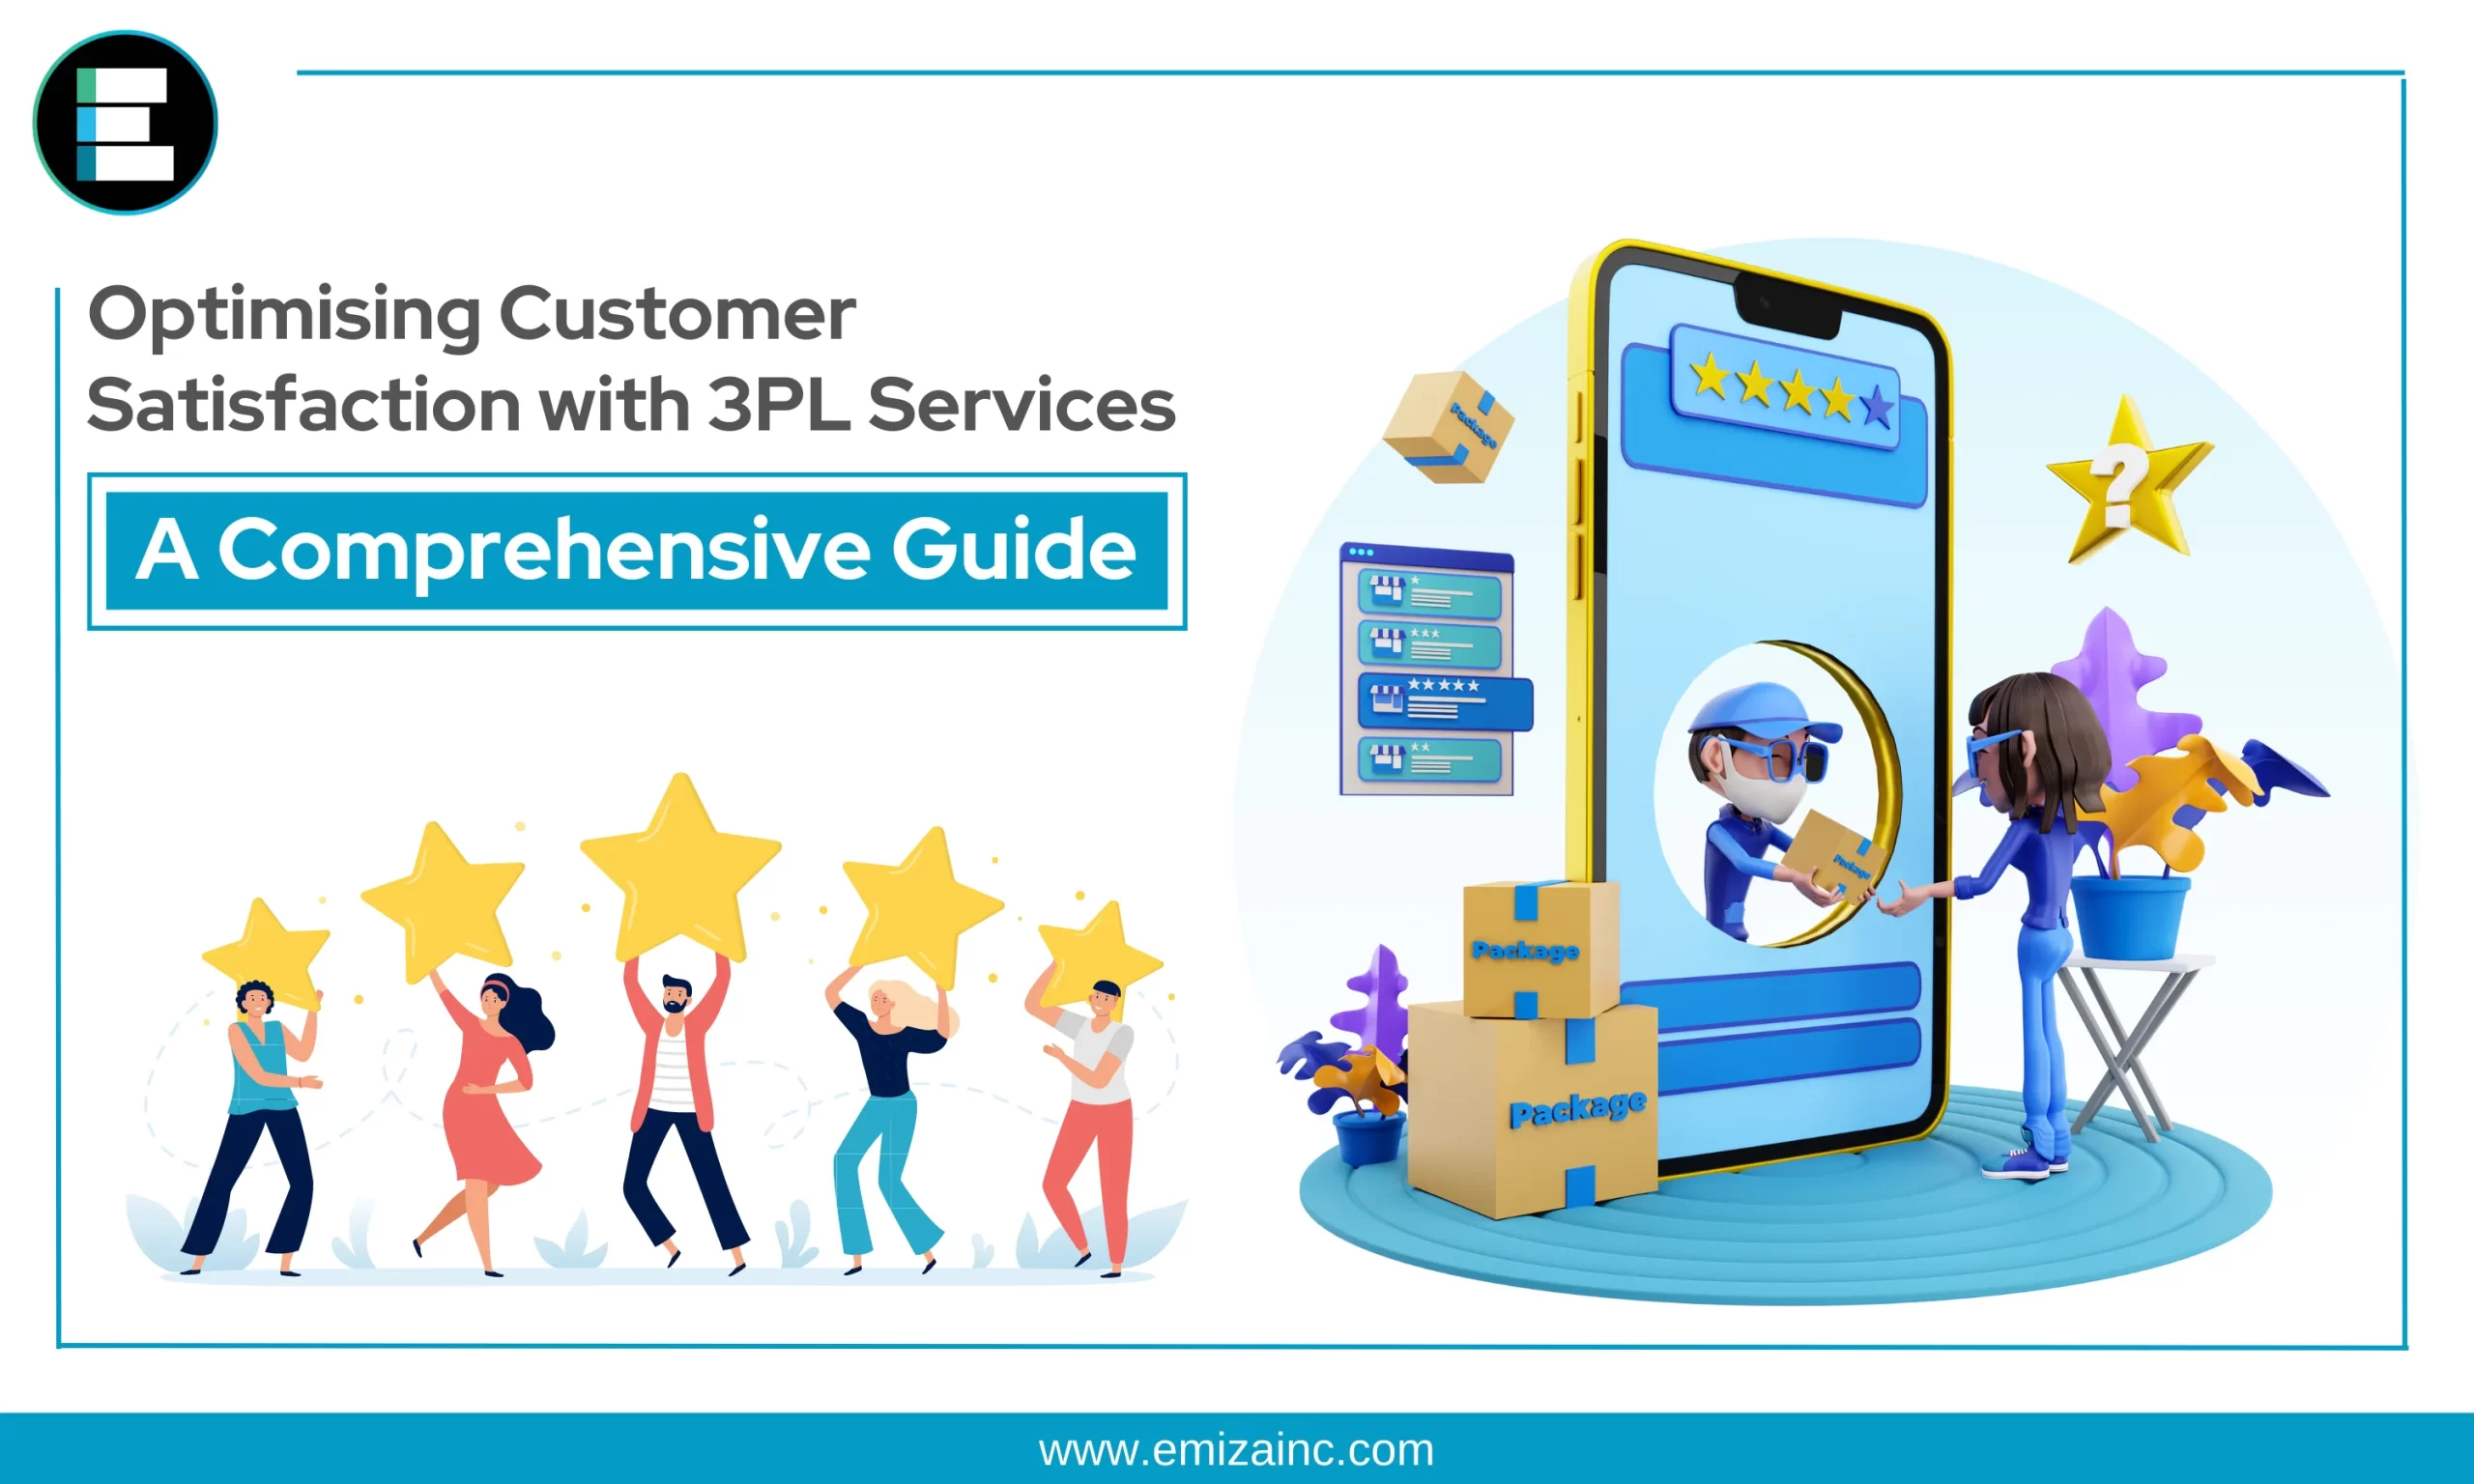 Optimising Customer Satisfaction with 3PL Services: A Comprehensive Guide